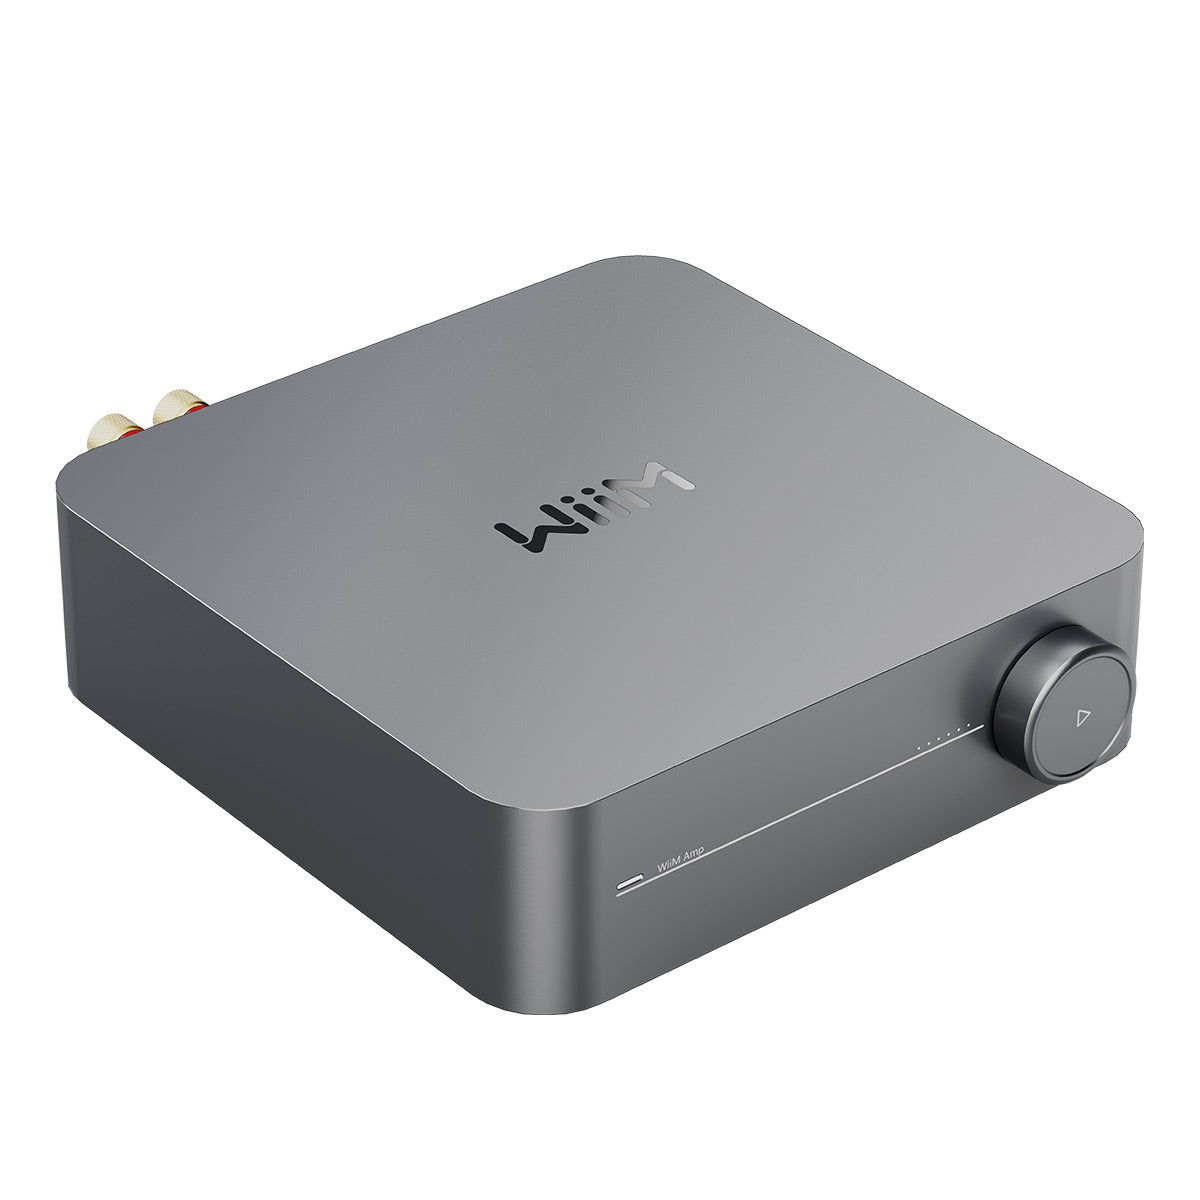 WiiM Amp Multiroom Streaming Amplifier with AirPlay 2, Chromecast, & Voice Control (Grey)